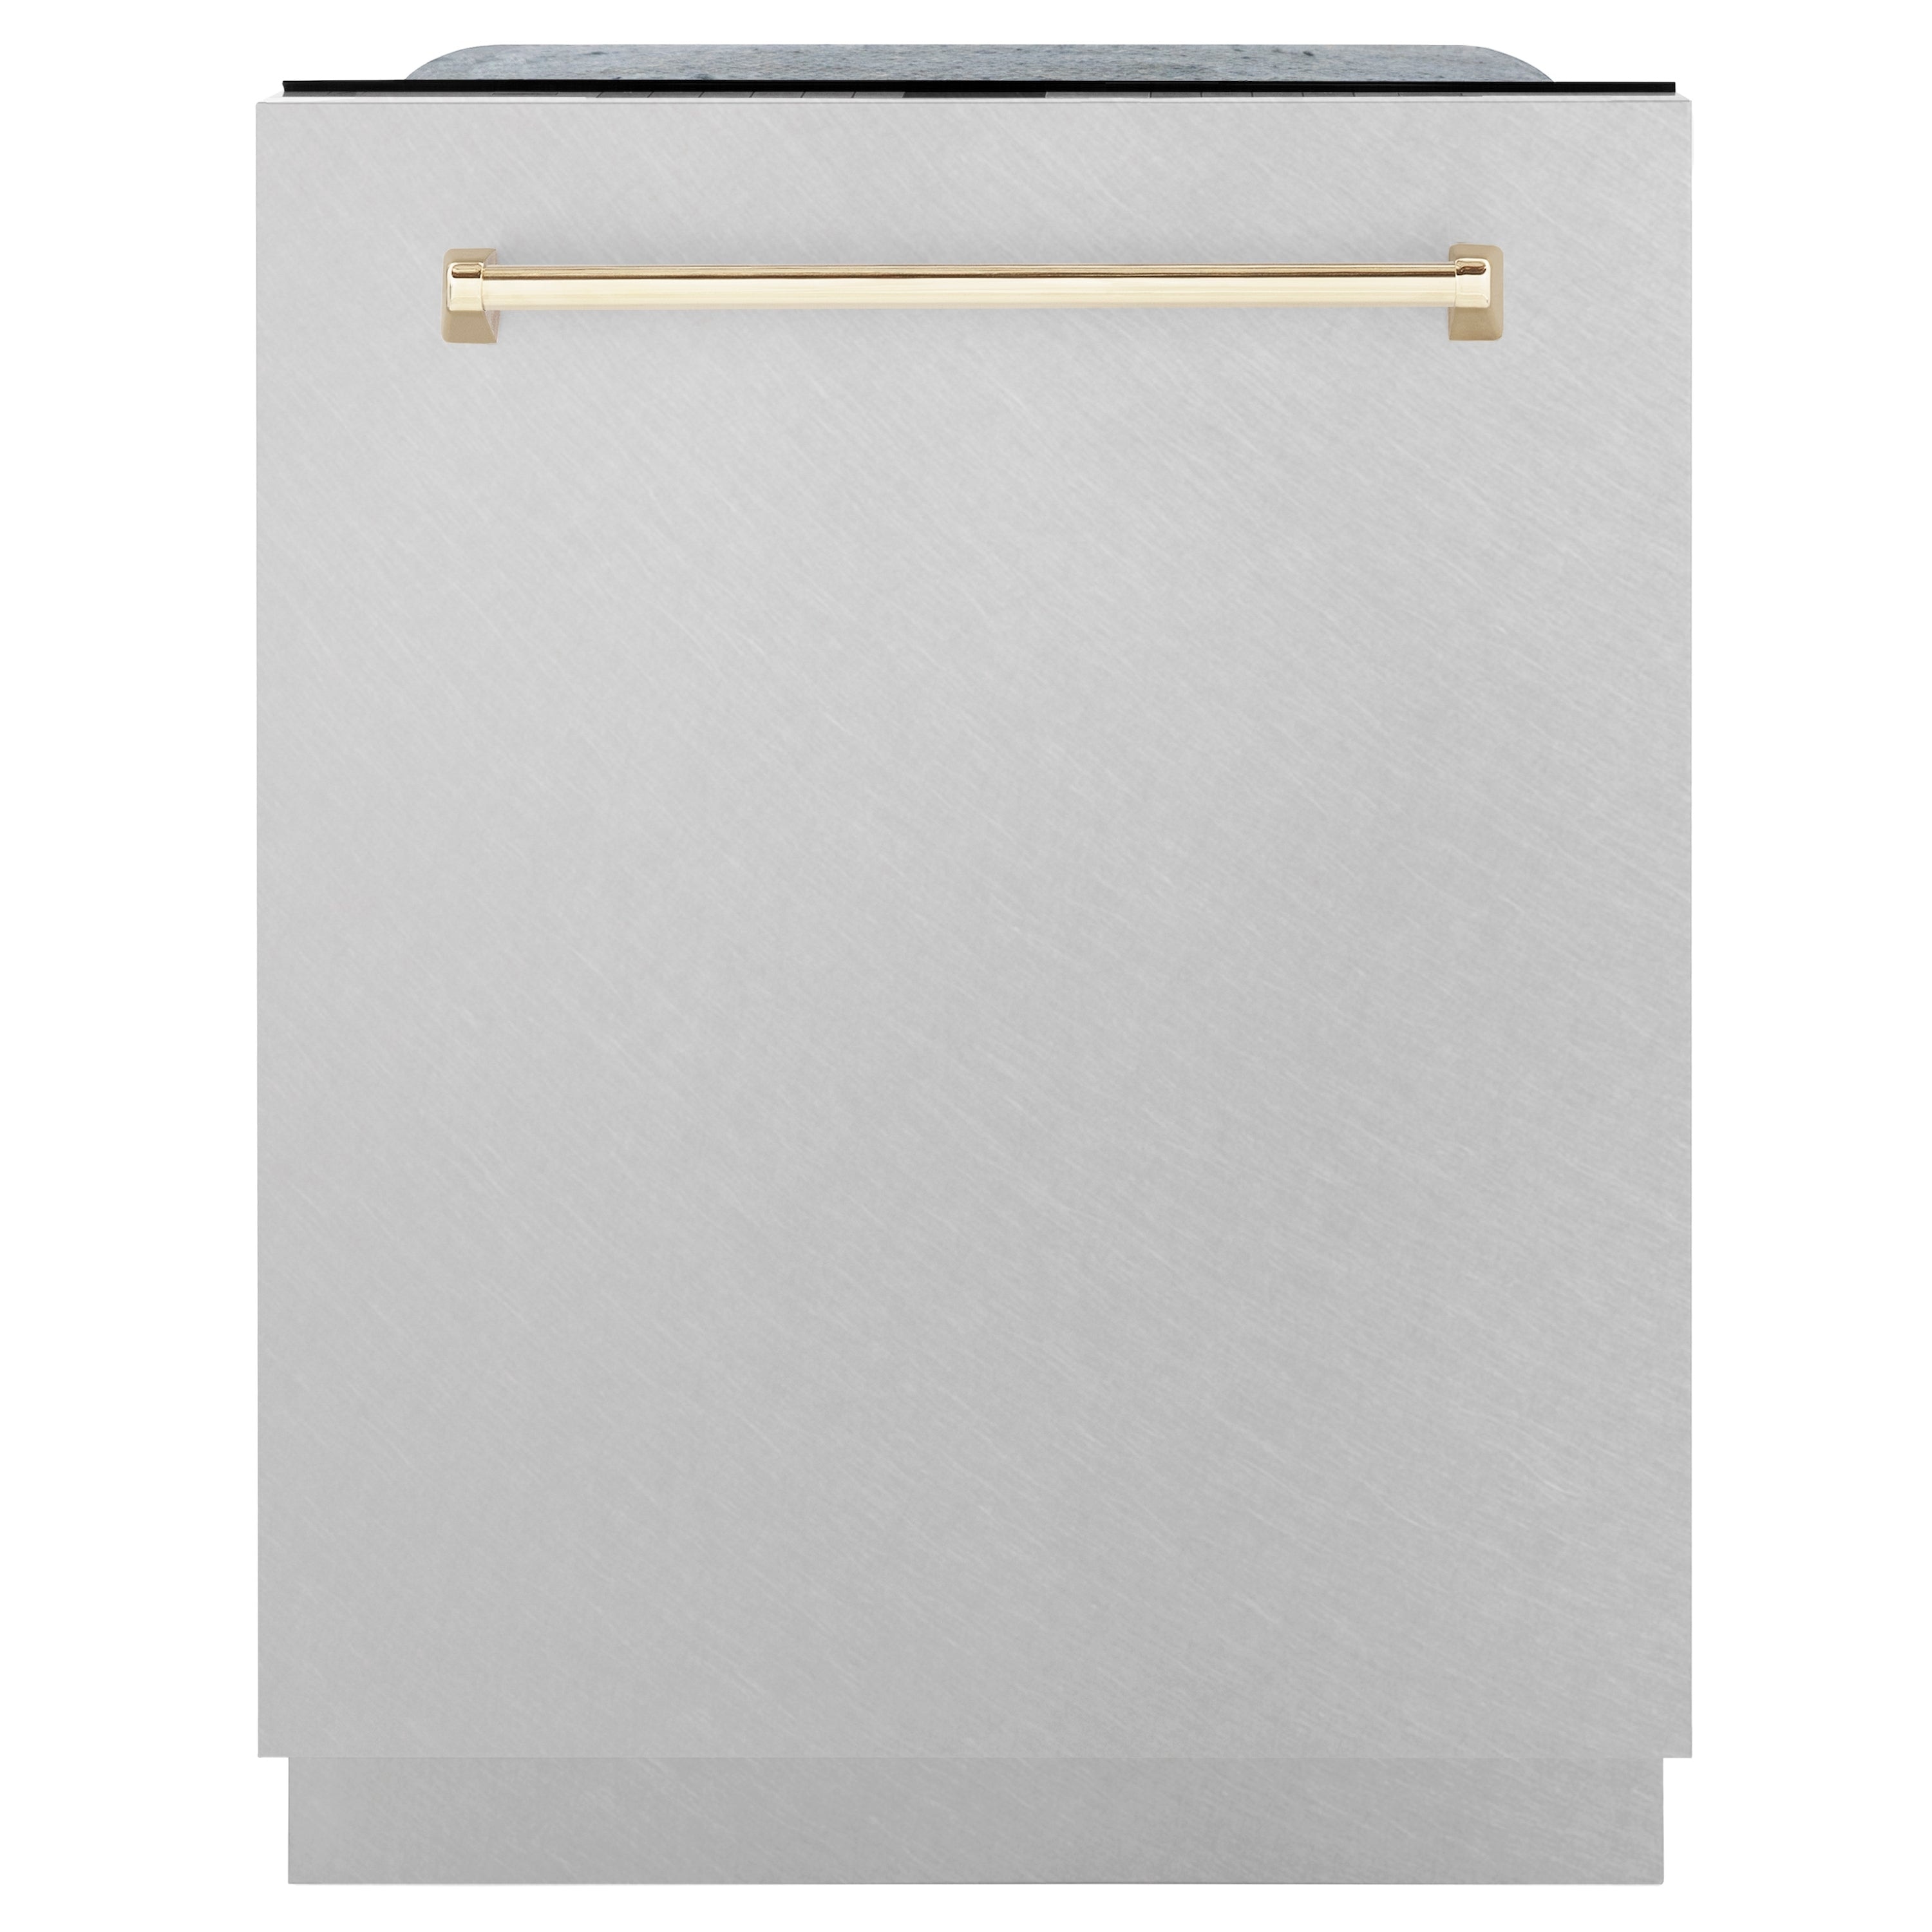 Zline Kitchen and Bath ZLINE Autograph Edition 24" 3rd Rack Top Touch Control Tall Tub Dishwasher in Fingerprint Resistant Stainless Steel, 45dBa